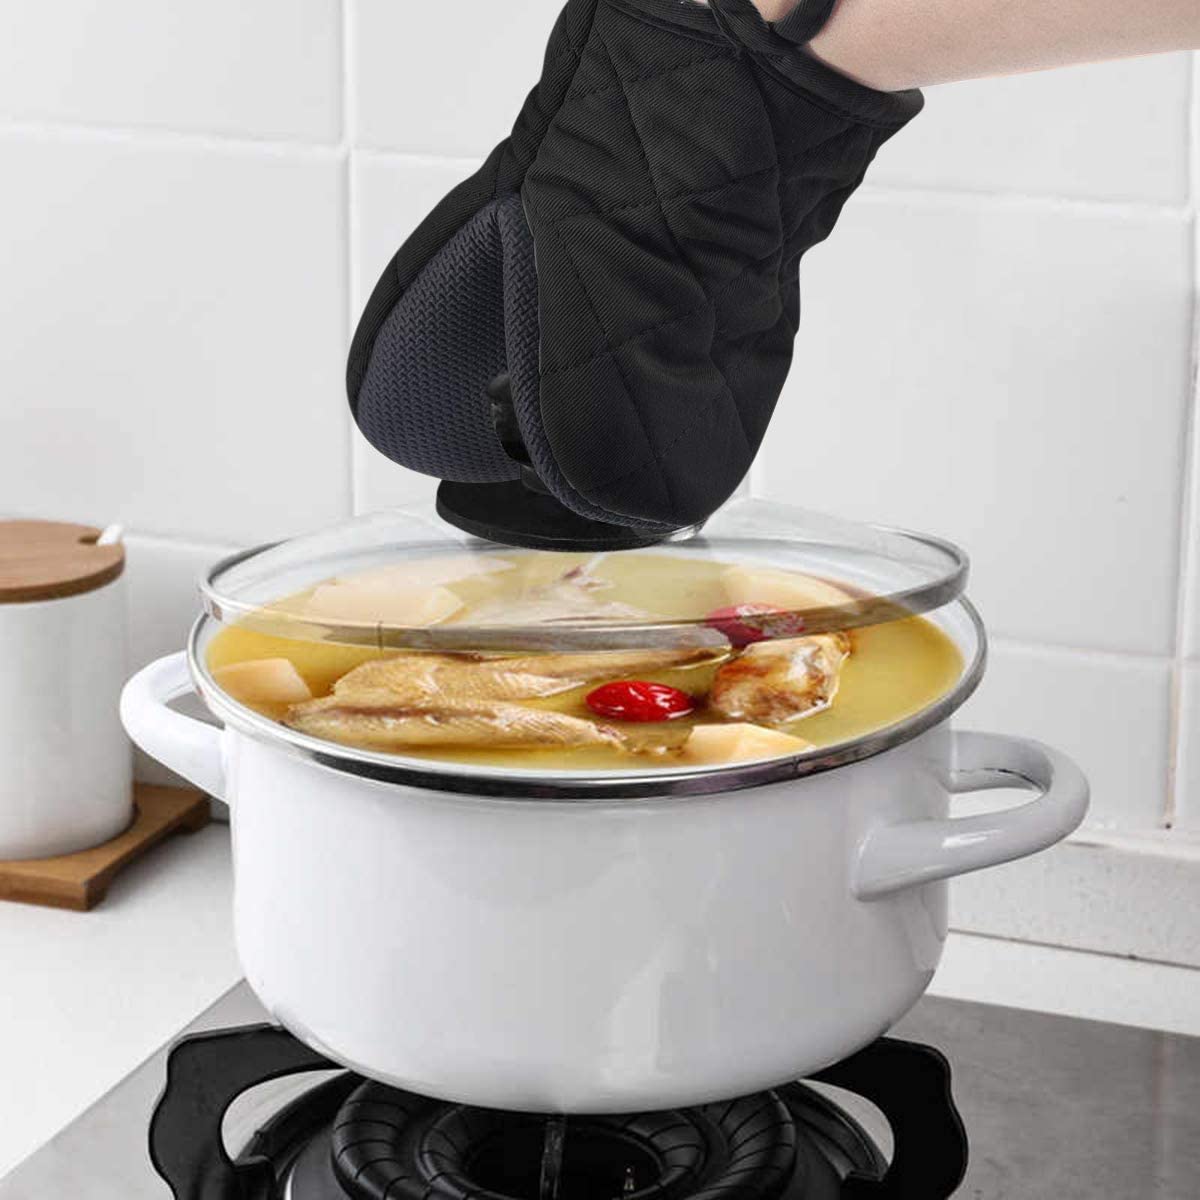 How to safely handle and cook with hot pots and pans